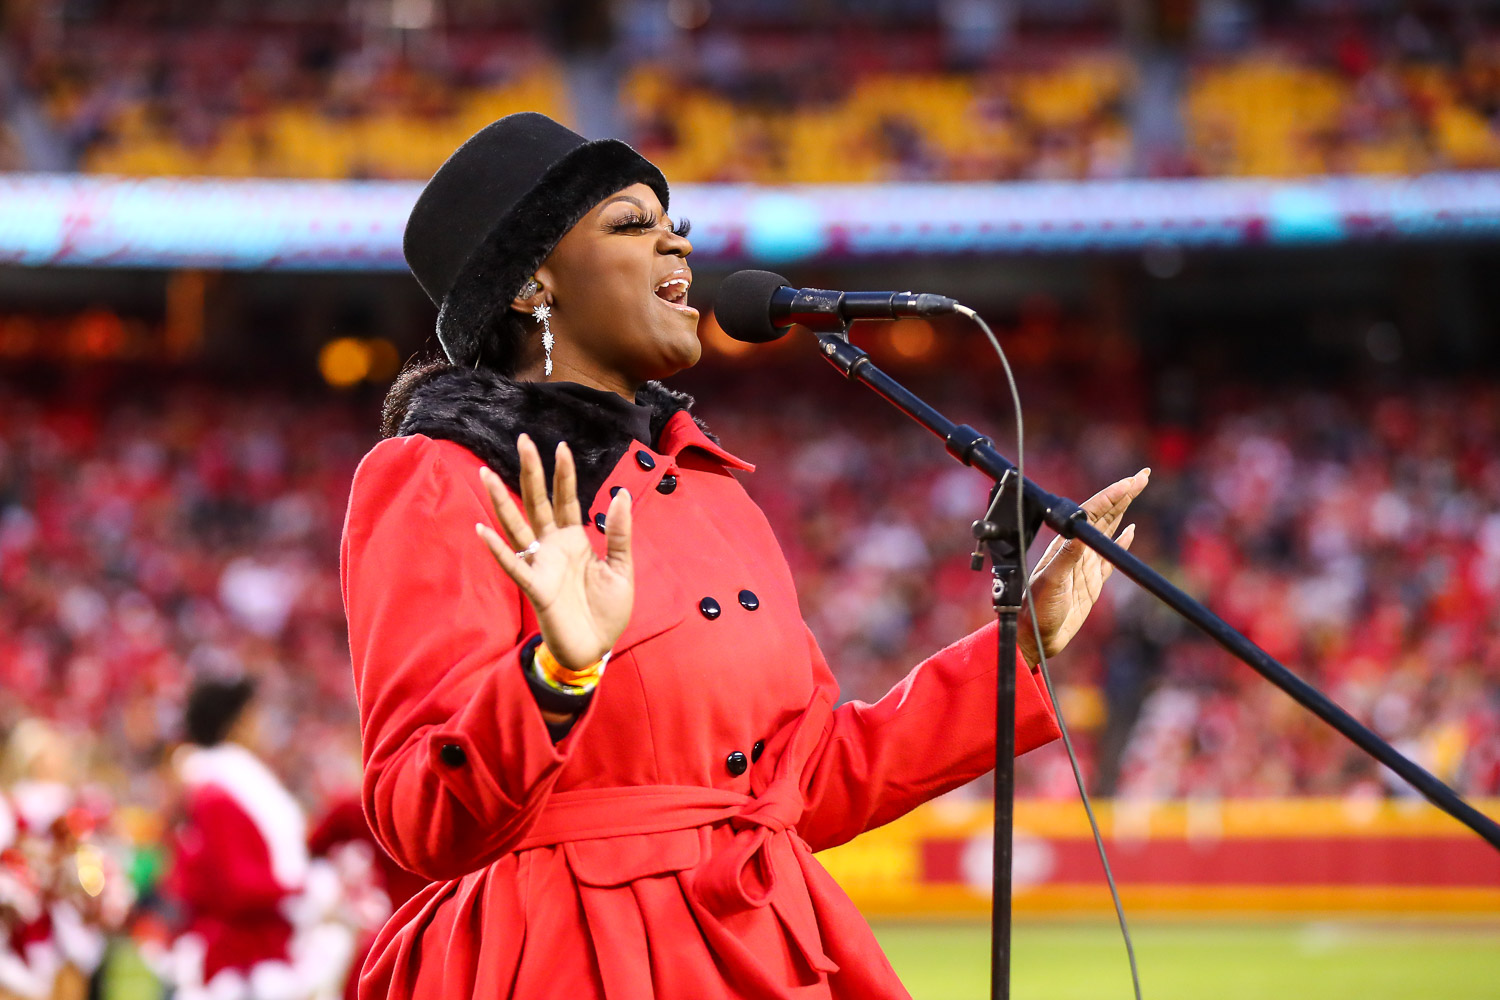 Singer/songwriter Symonne Sparks sings a holiday medley at halftime during an NFL football game against the Pittsburgh Steelers, Sunday, December 26, 2021 in Kansas City.